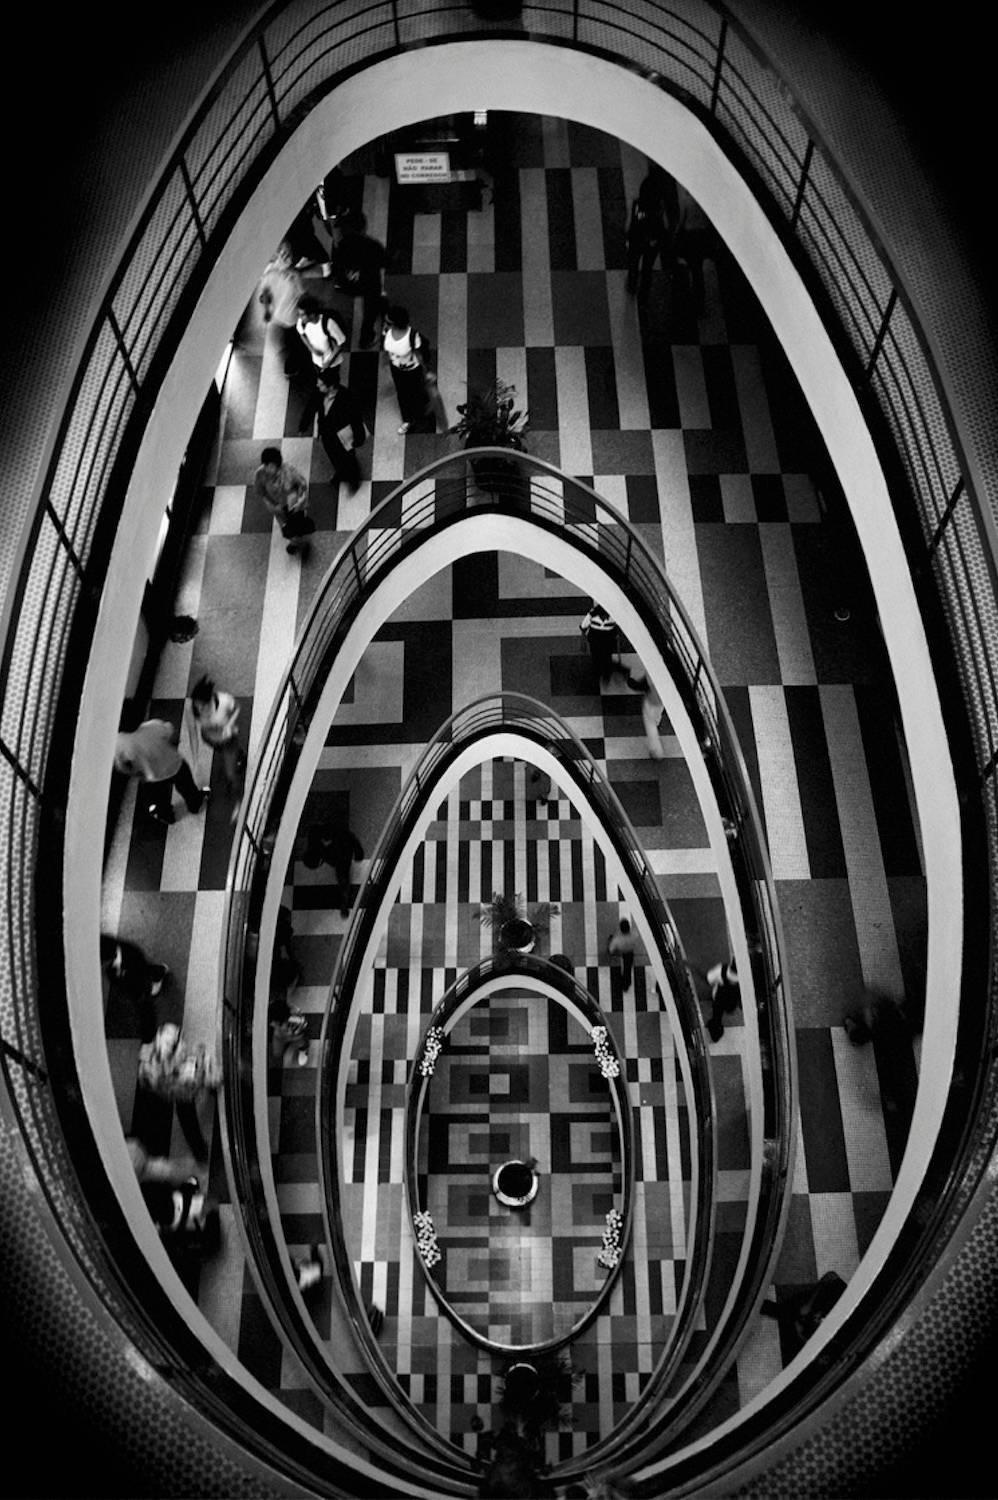 Guilherme Licurgo Black and White Photograph - Egg, São Paulo. From the Brazil and Beyond Series. 